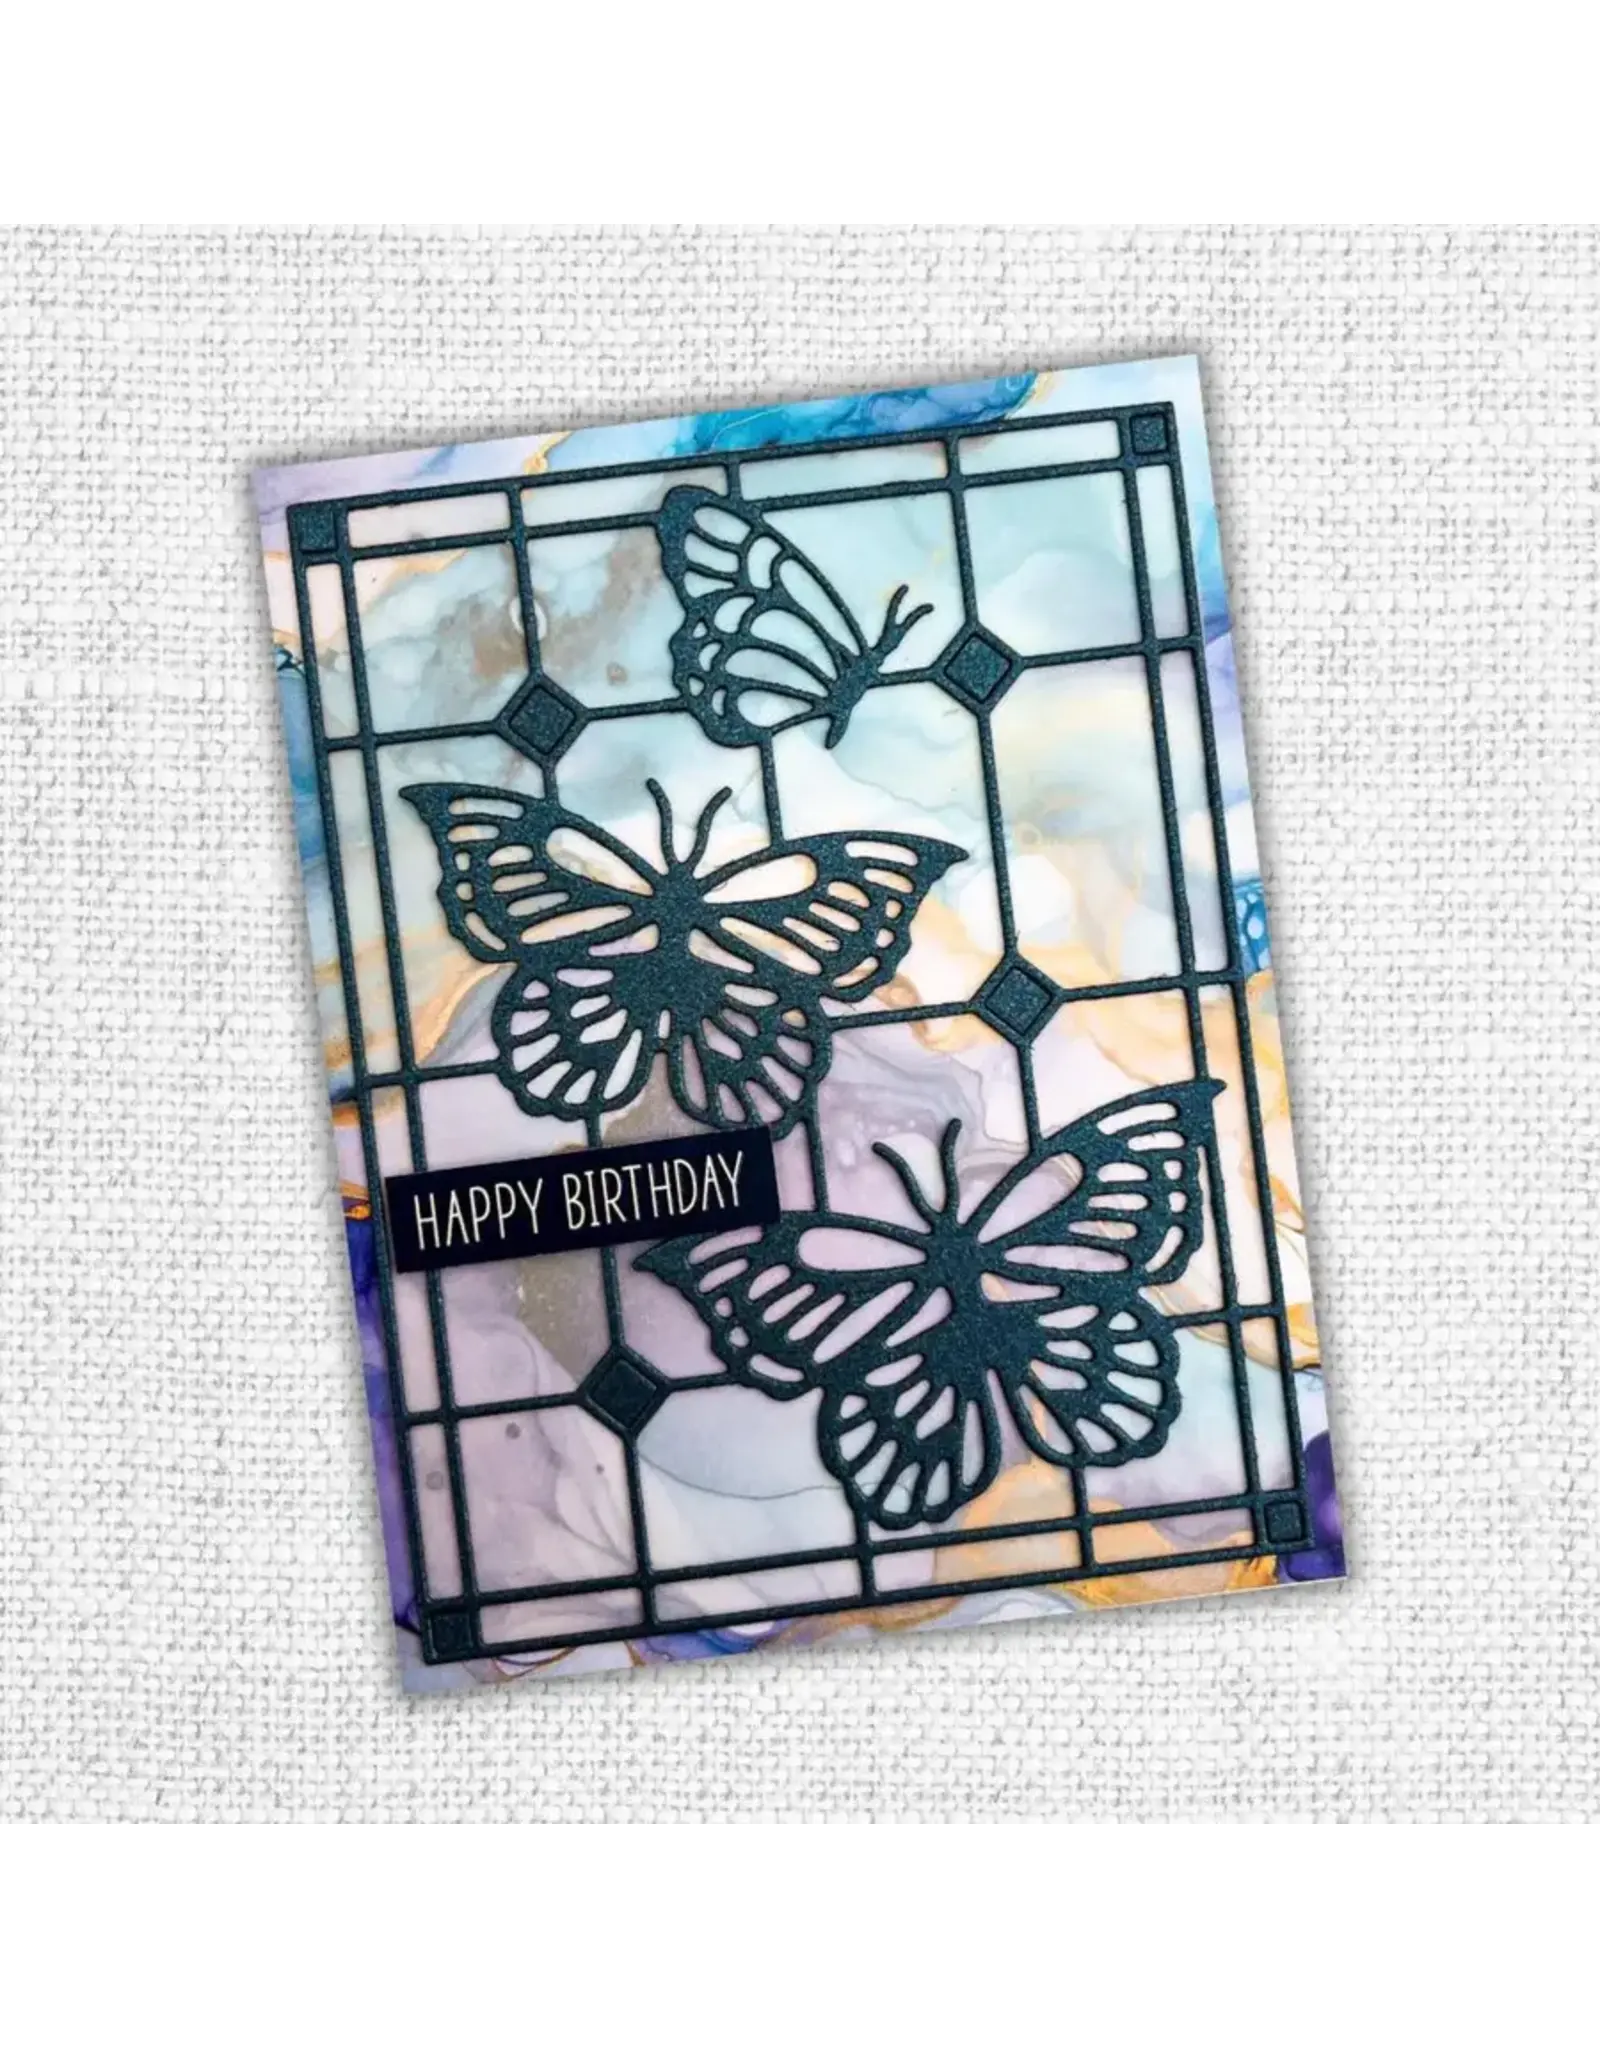 PAPER ROSE PAPER ROSE STUDIO ALORA BUTTERFLY STAINED GLASS COVERPLATE METAL DIE